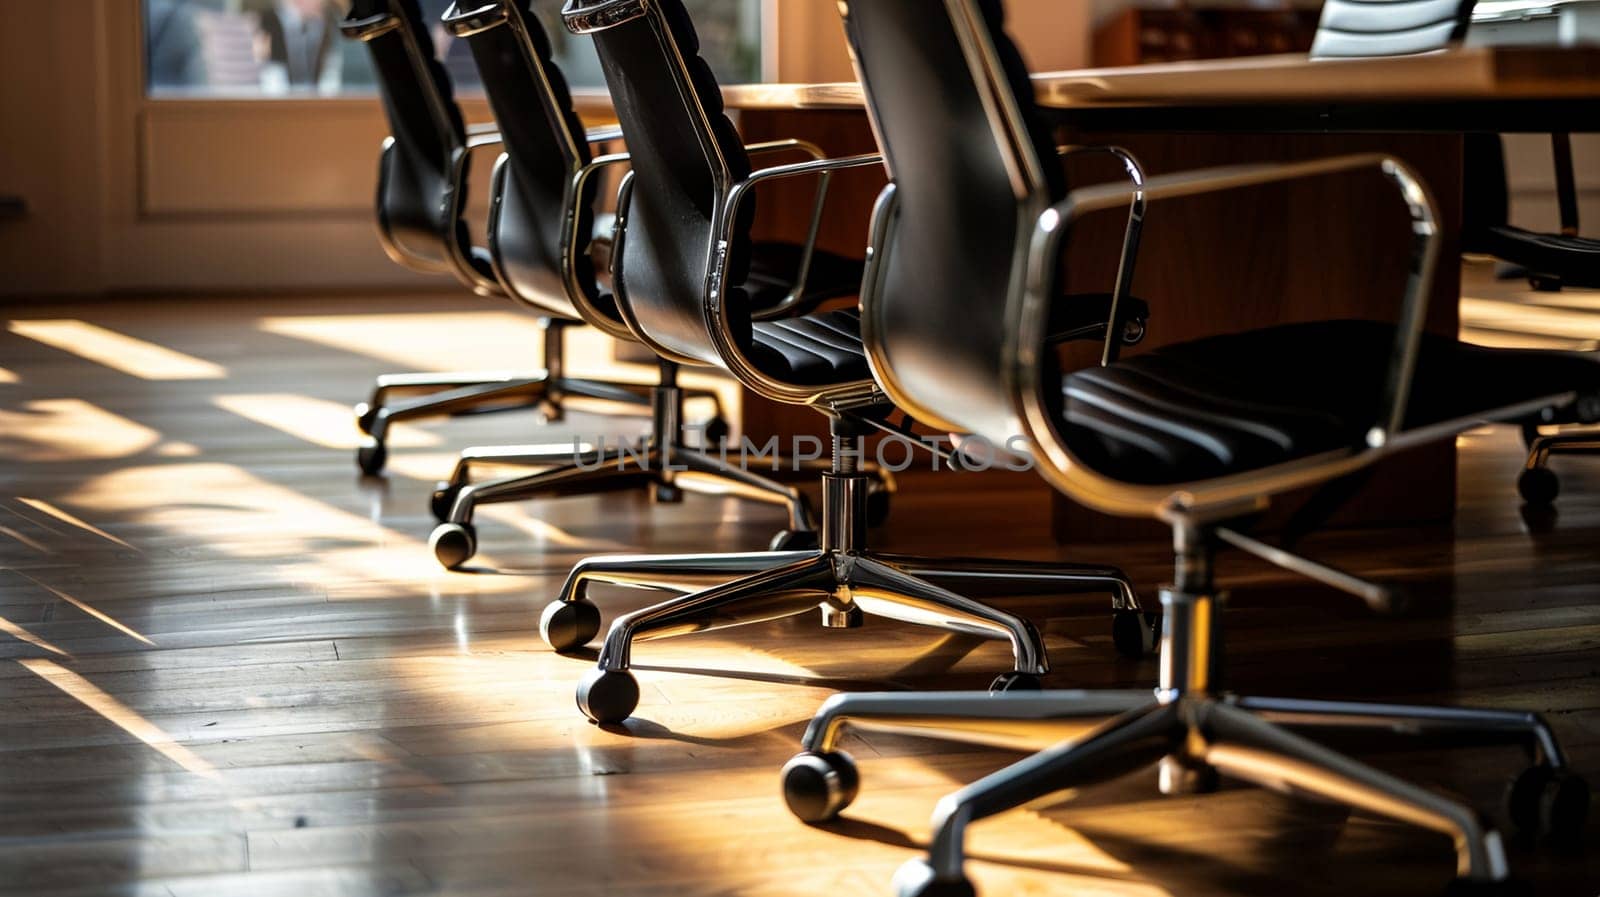 Elegant black chairs lined around a polished wooden conference table in modern office setting with natural sunlight